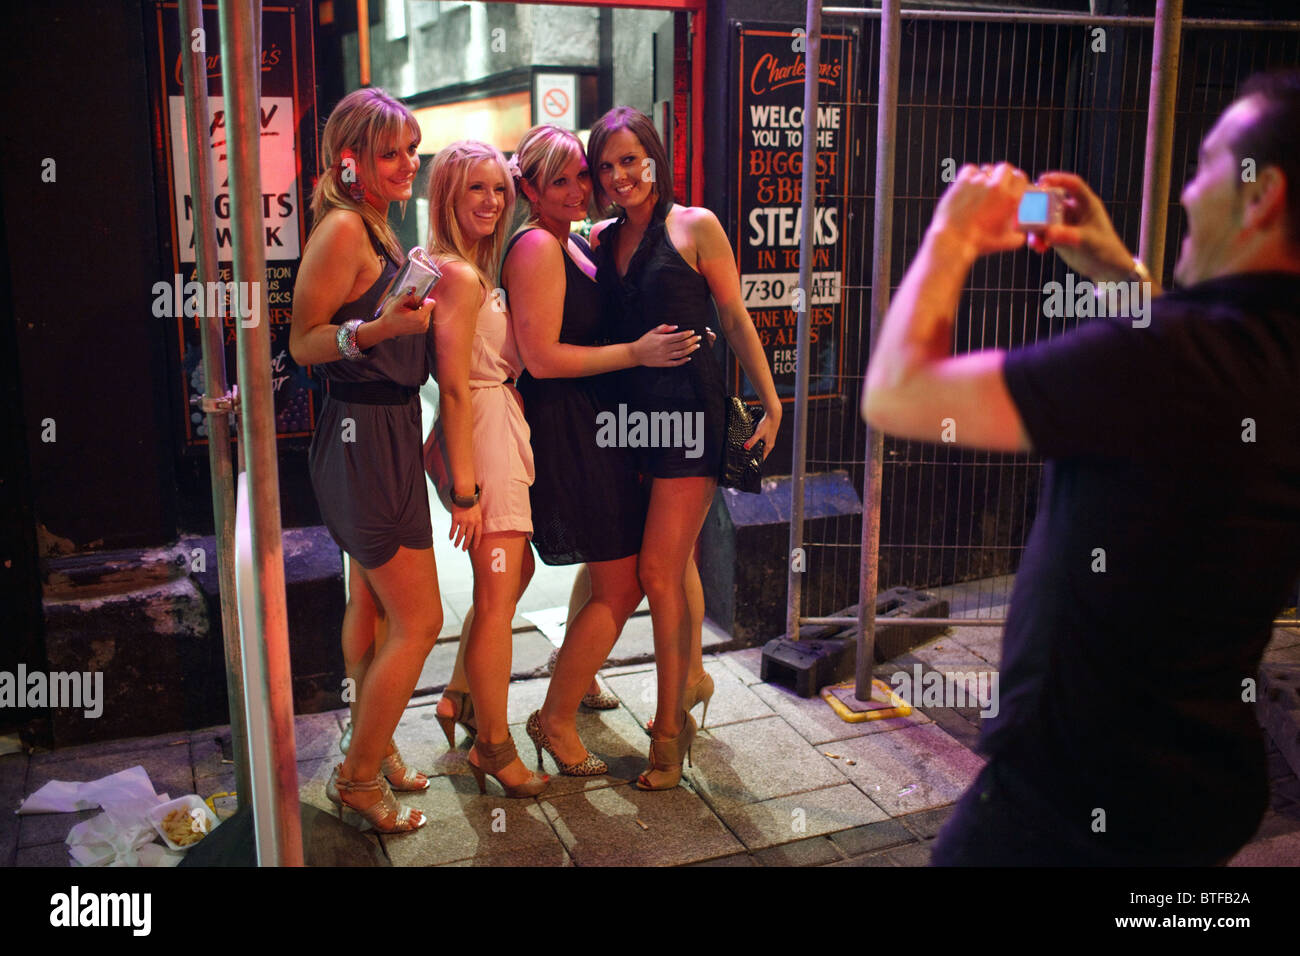 A group of young women poses to a photo on Caroline street in the city centre of Cardiff on a Saturday night. Stock Photo